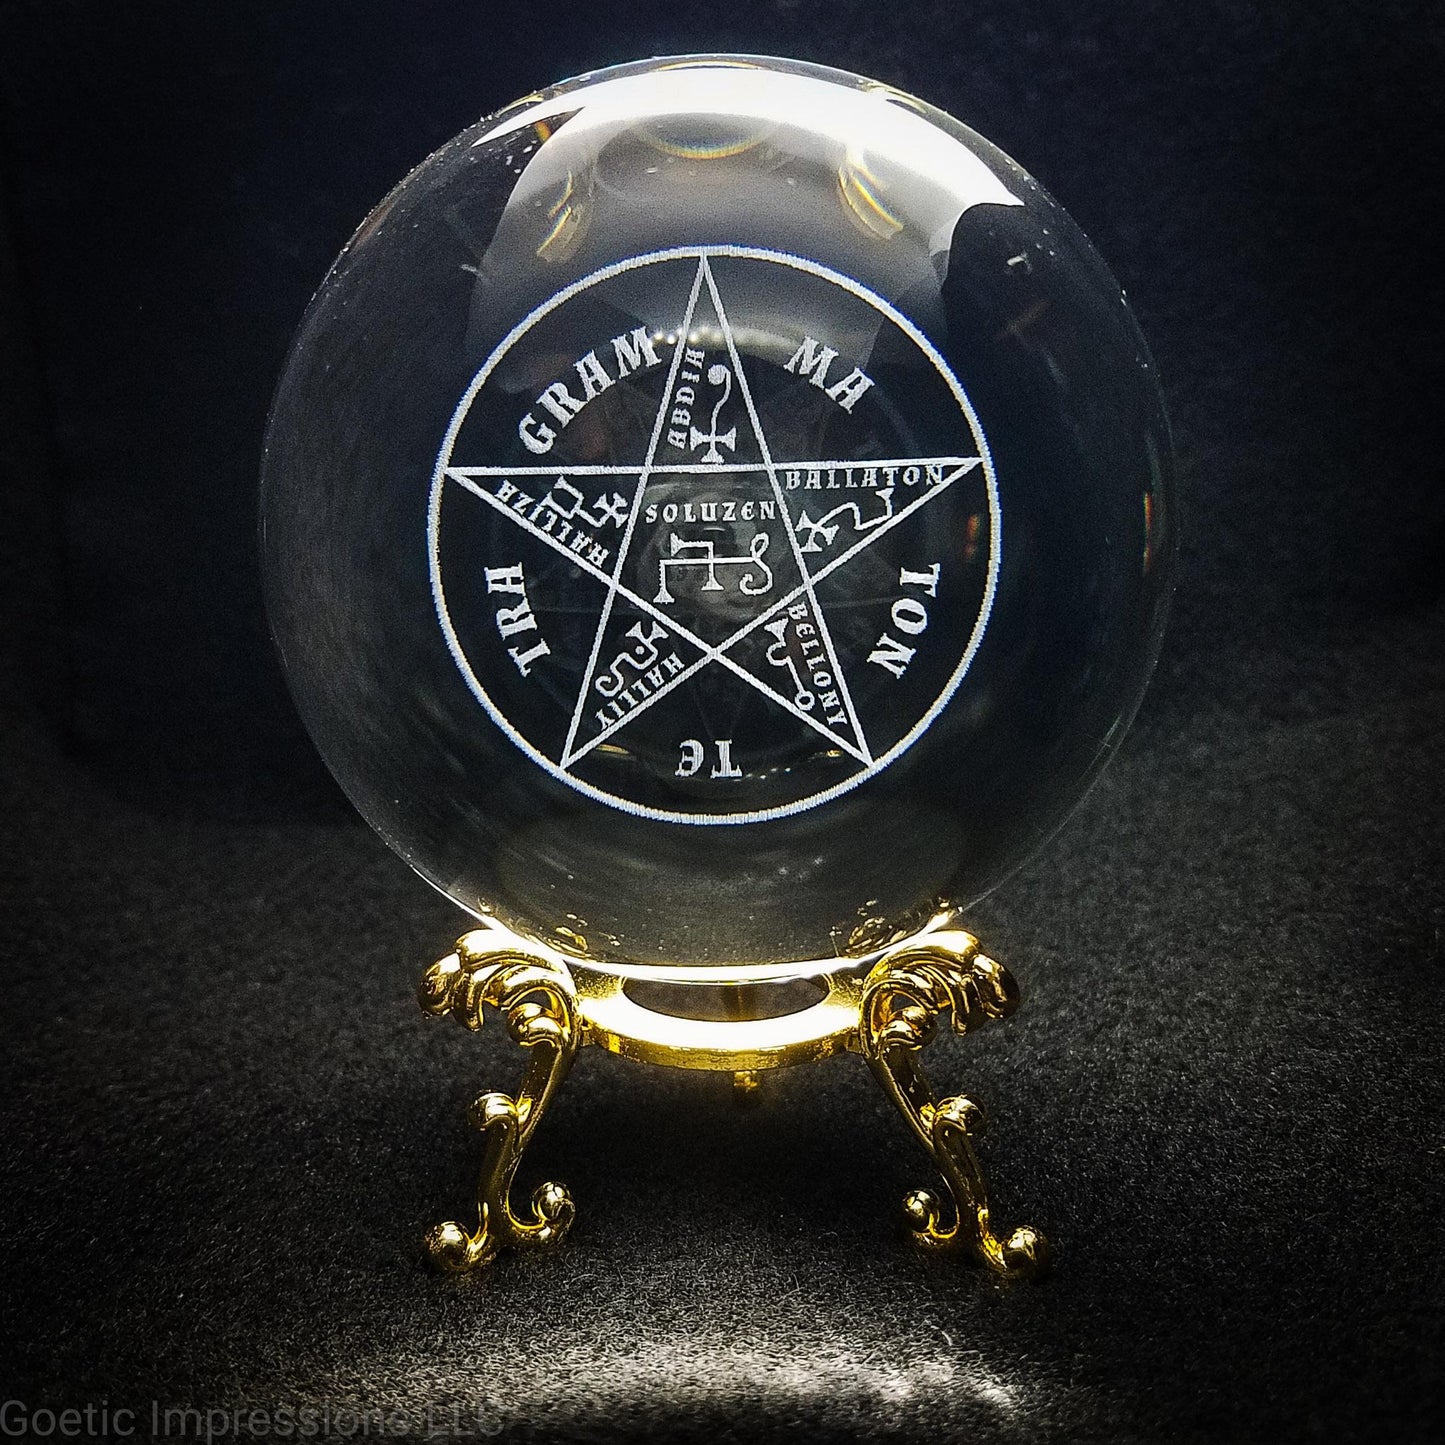 Pentacle of Solomon engraved in a crystal ball